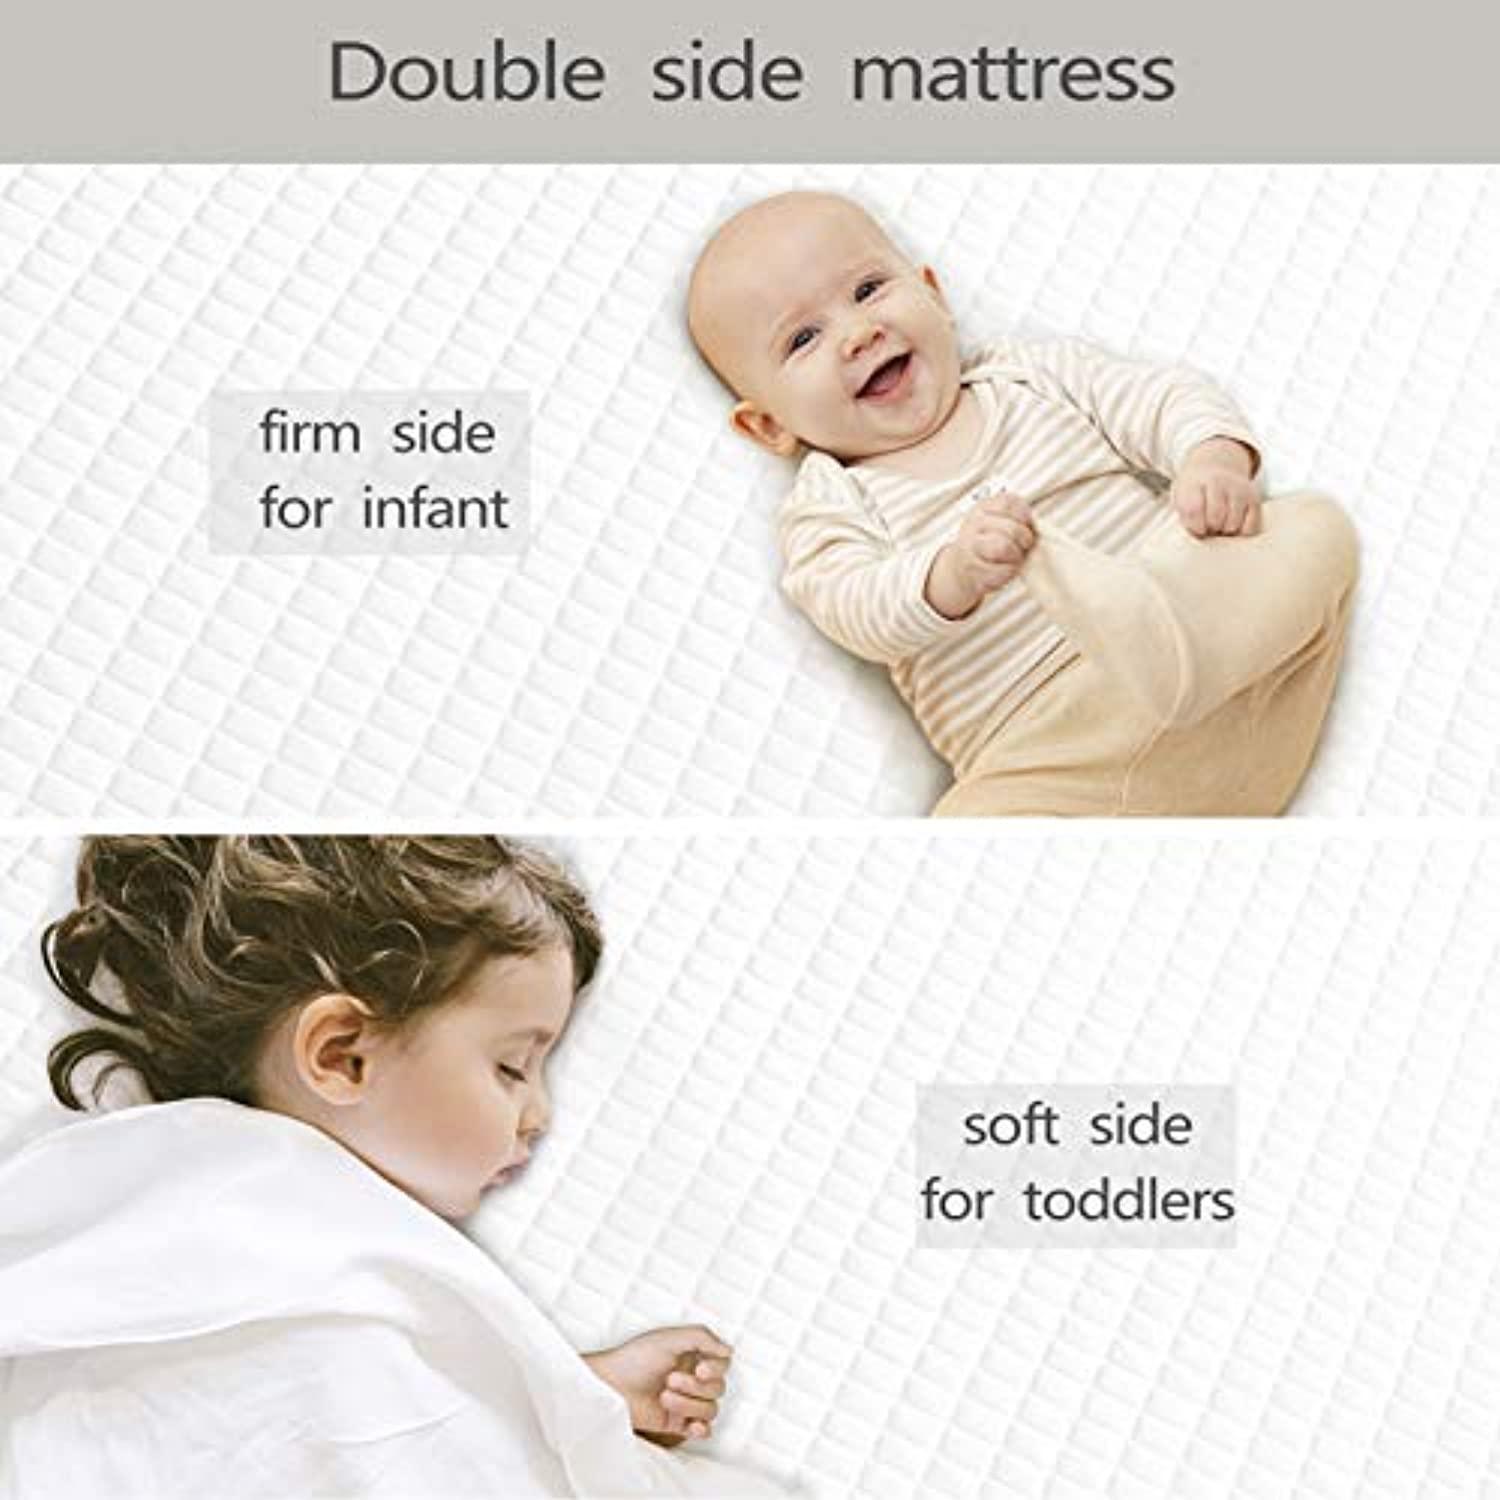 Baby Crib Toddler Bed Memory Foam Mattress – The Baby's Room